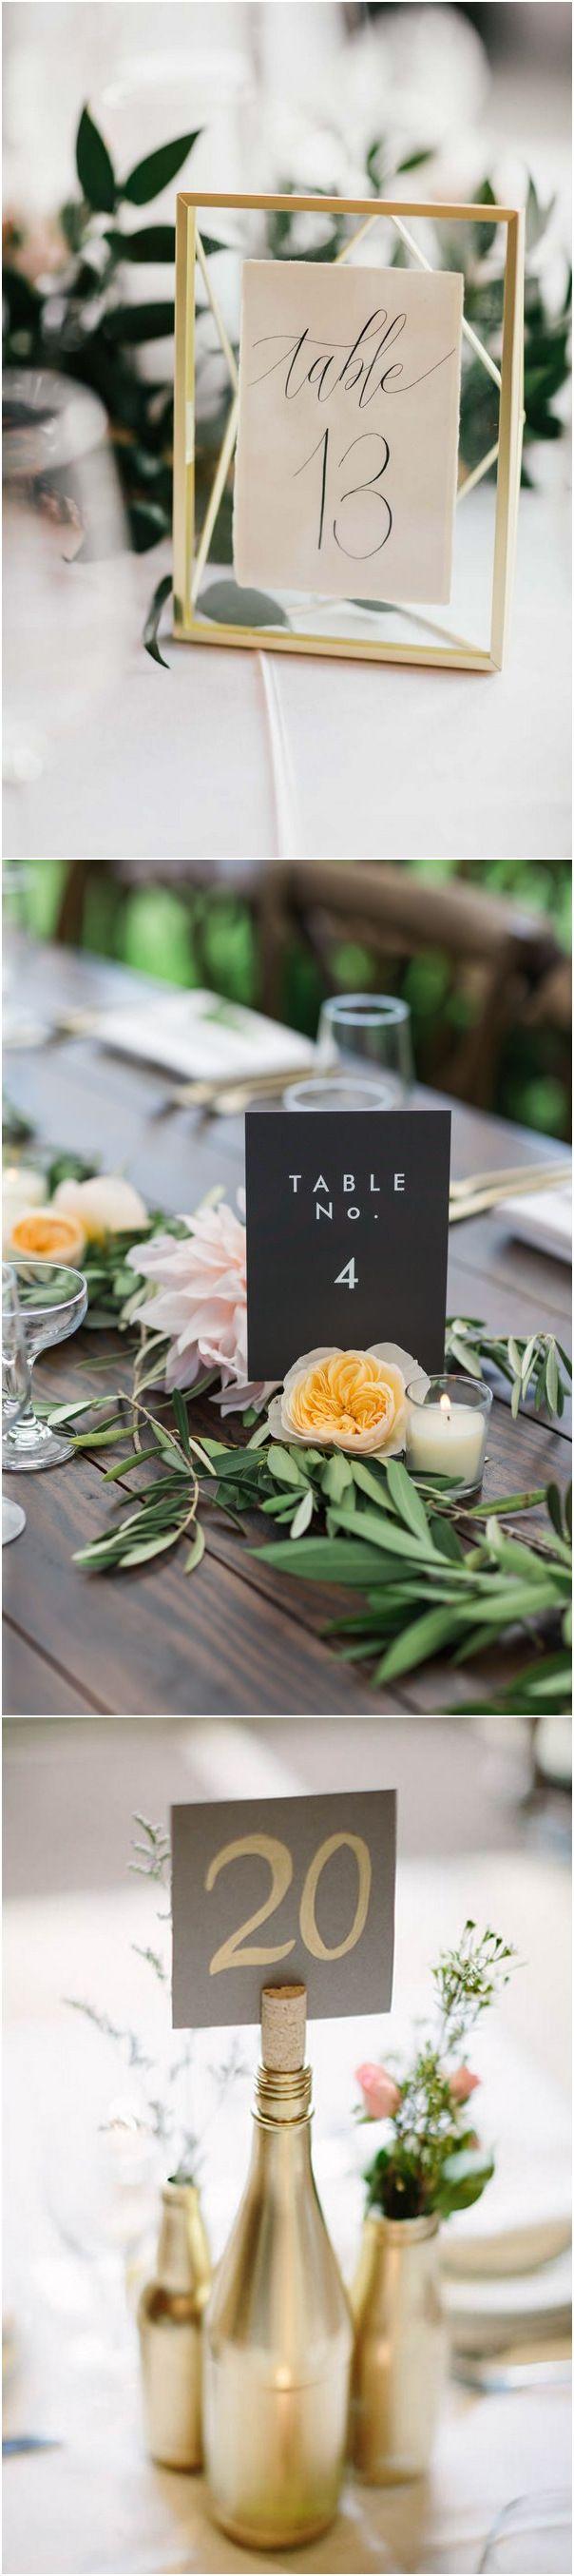 Wedding - 18 Inspiring Wedding Table Number Ideas To Love - Page 3 Of 3